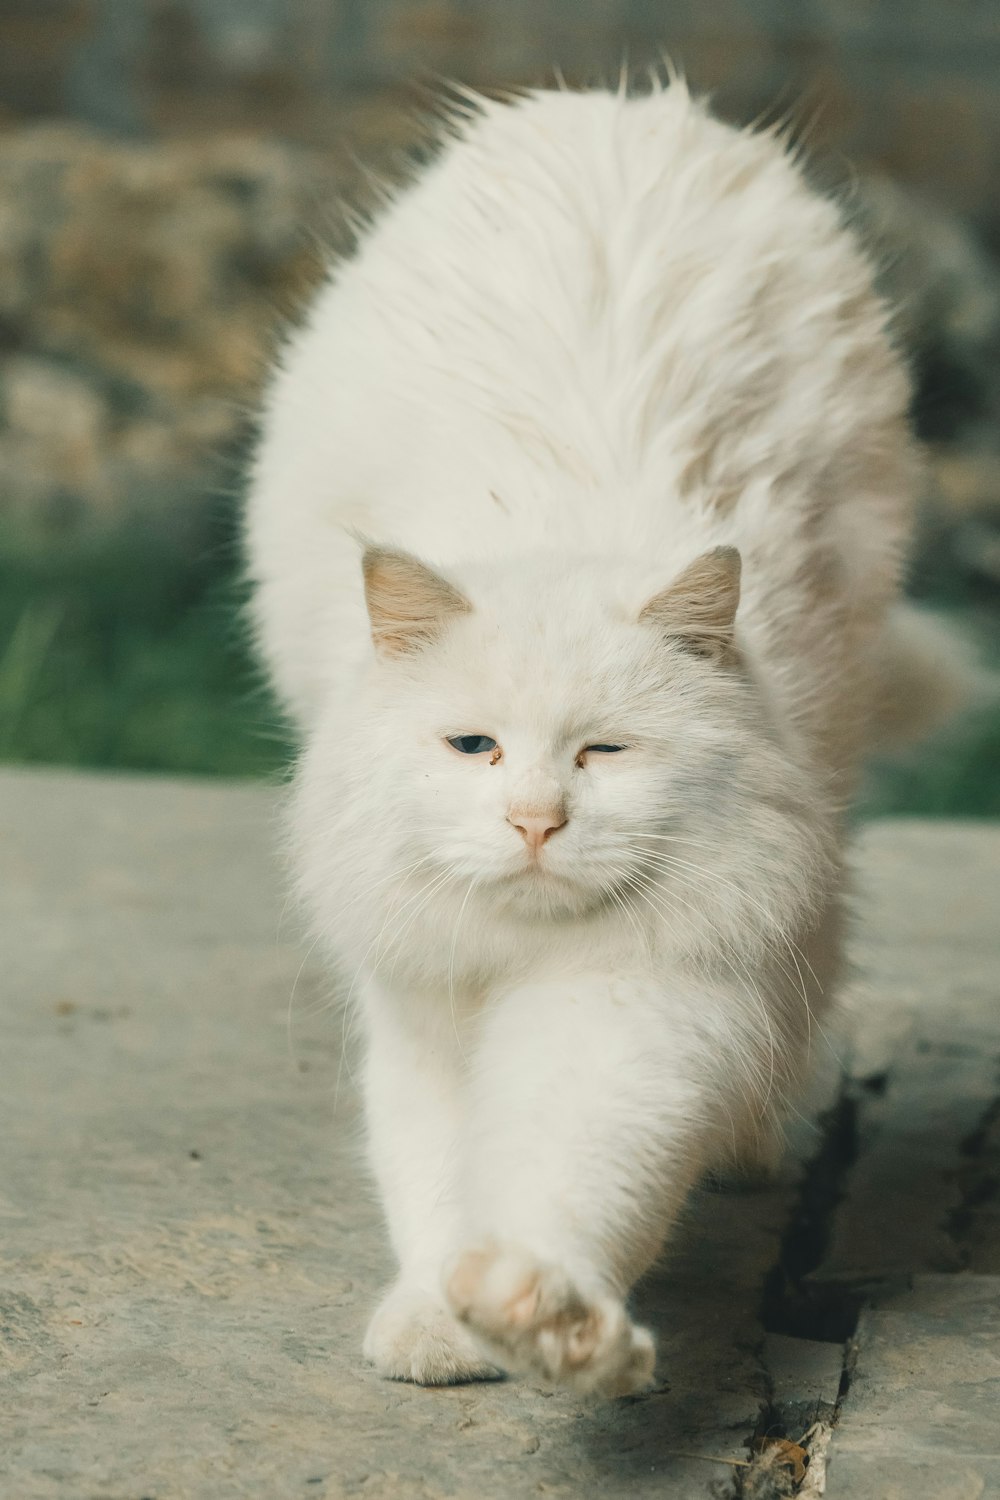 a white cat walking across a cement surface